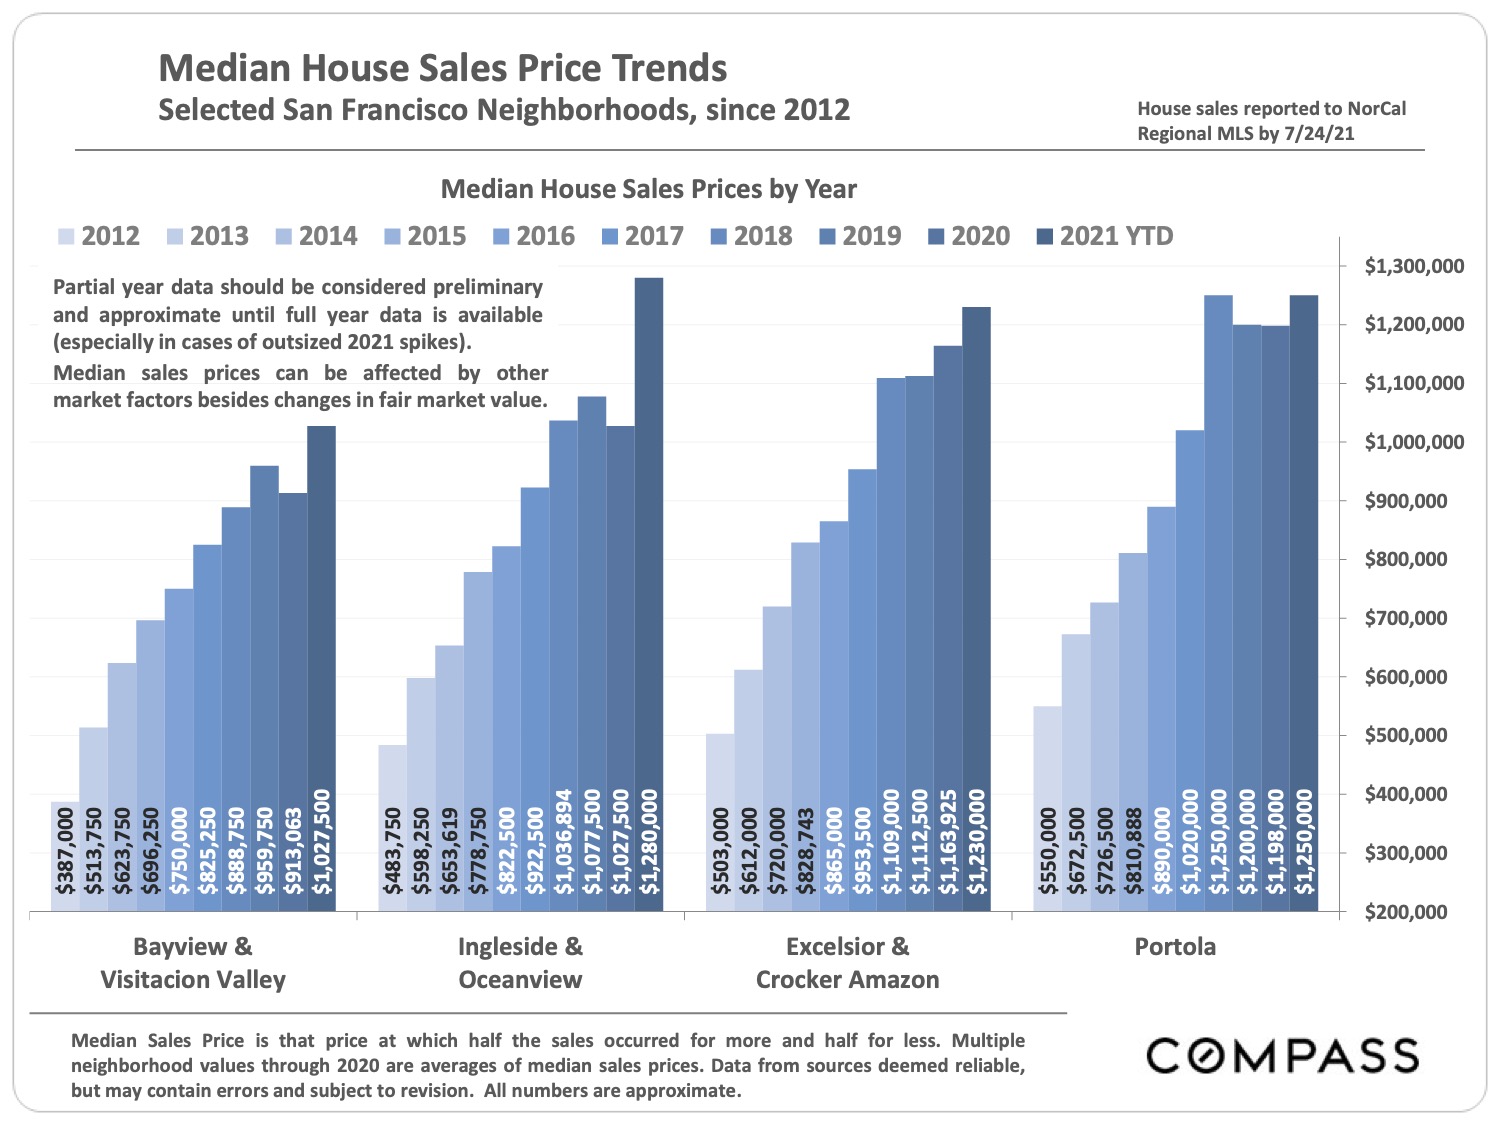 Image of Median House Sales Price Trends Selected San Francisco neighborhoods, since 2012